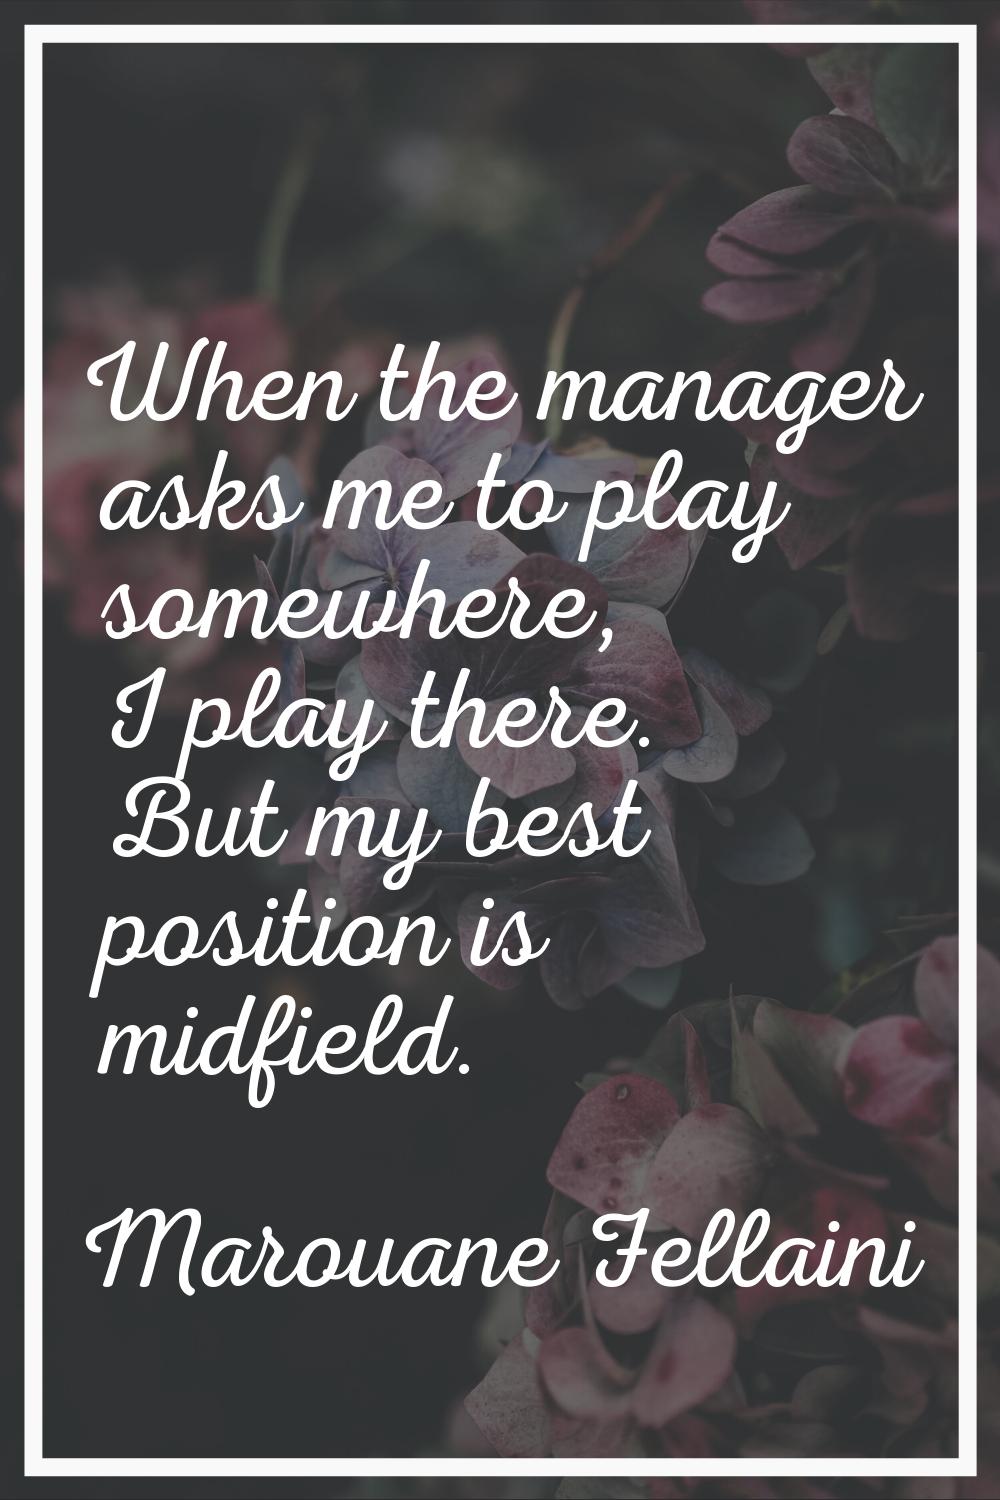 When the manager asks me to play somewhere, I play there. But my best position is midfield.